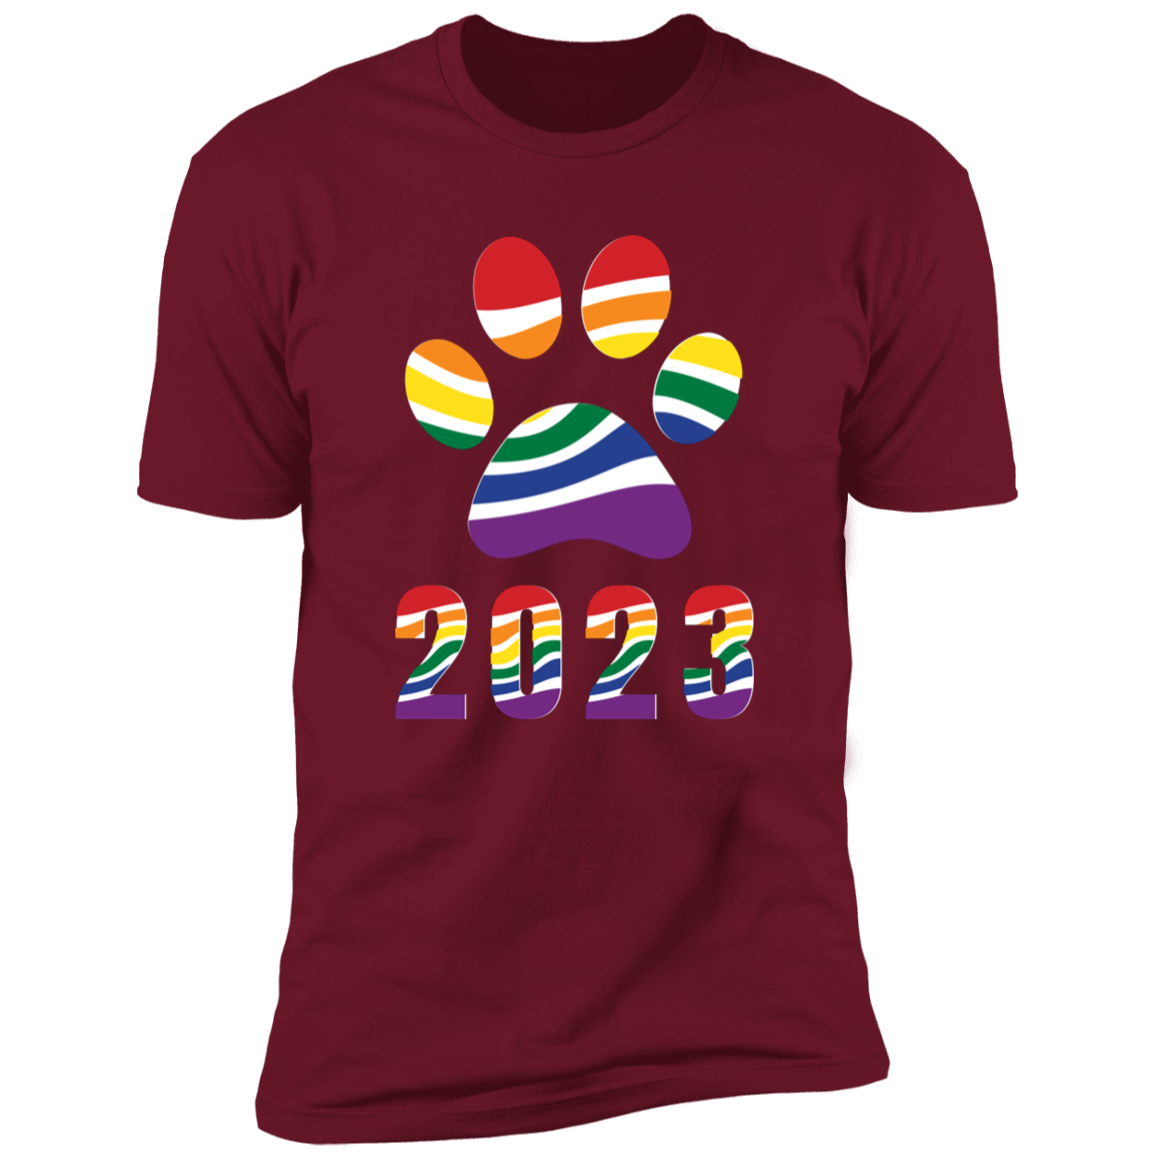 Pride Paw 2023 (Retro) Pride T-shirt, Paw Pride Dog Shirt for humans, in cardinal red